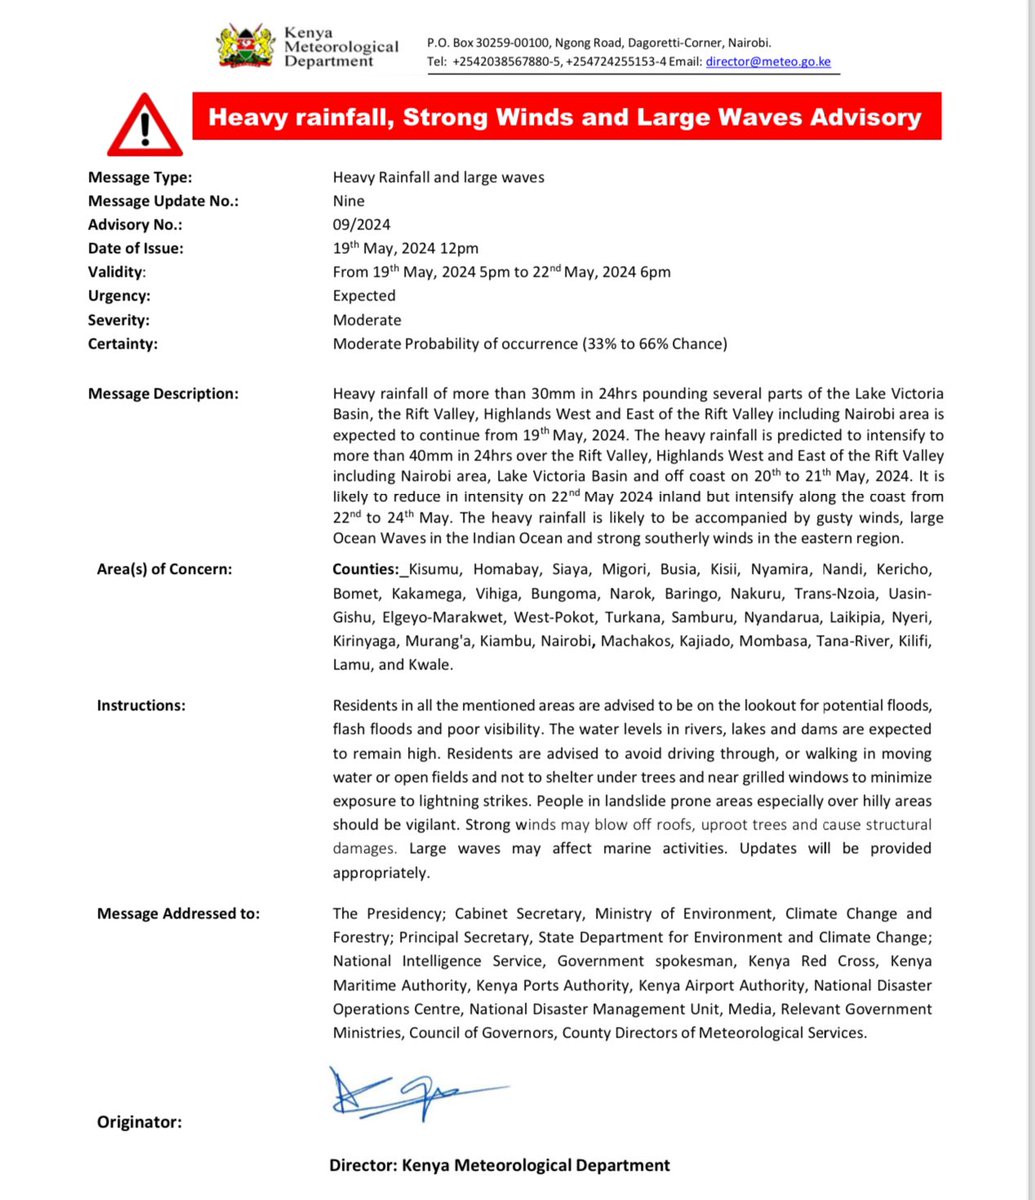 The Kenya Meteorological Department has issued an advisory for heavy rainfall, strong winds and large waves.

Stay informed and take all necessary precautions to ensure your safety.